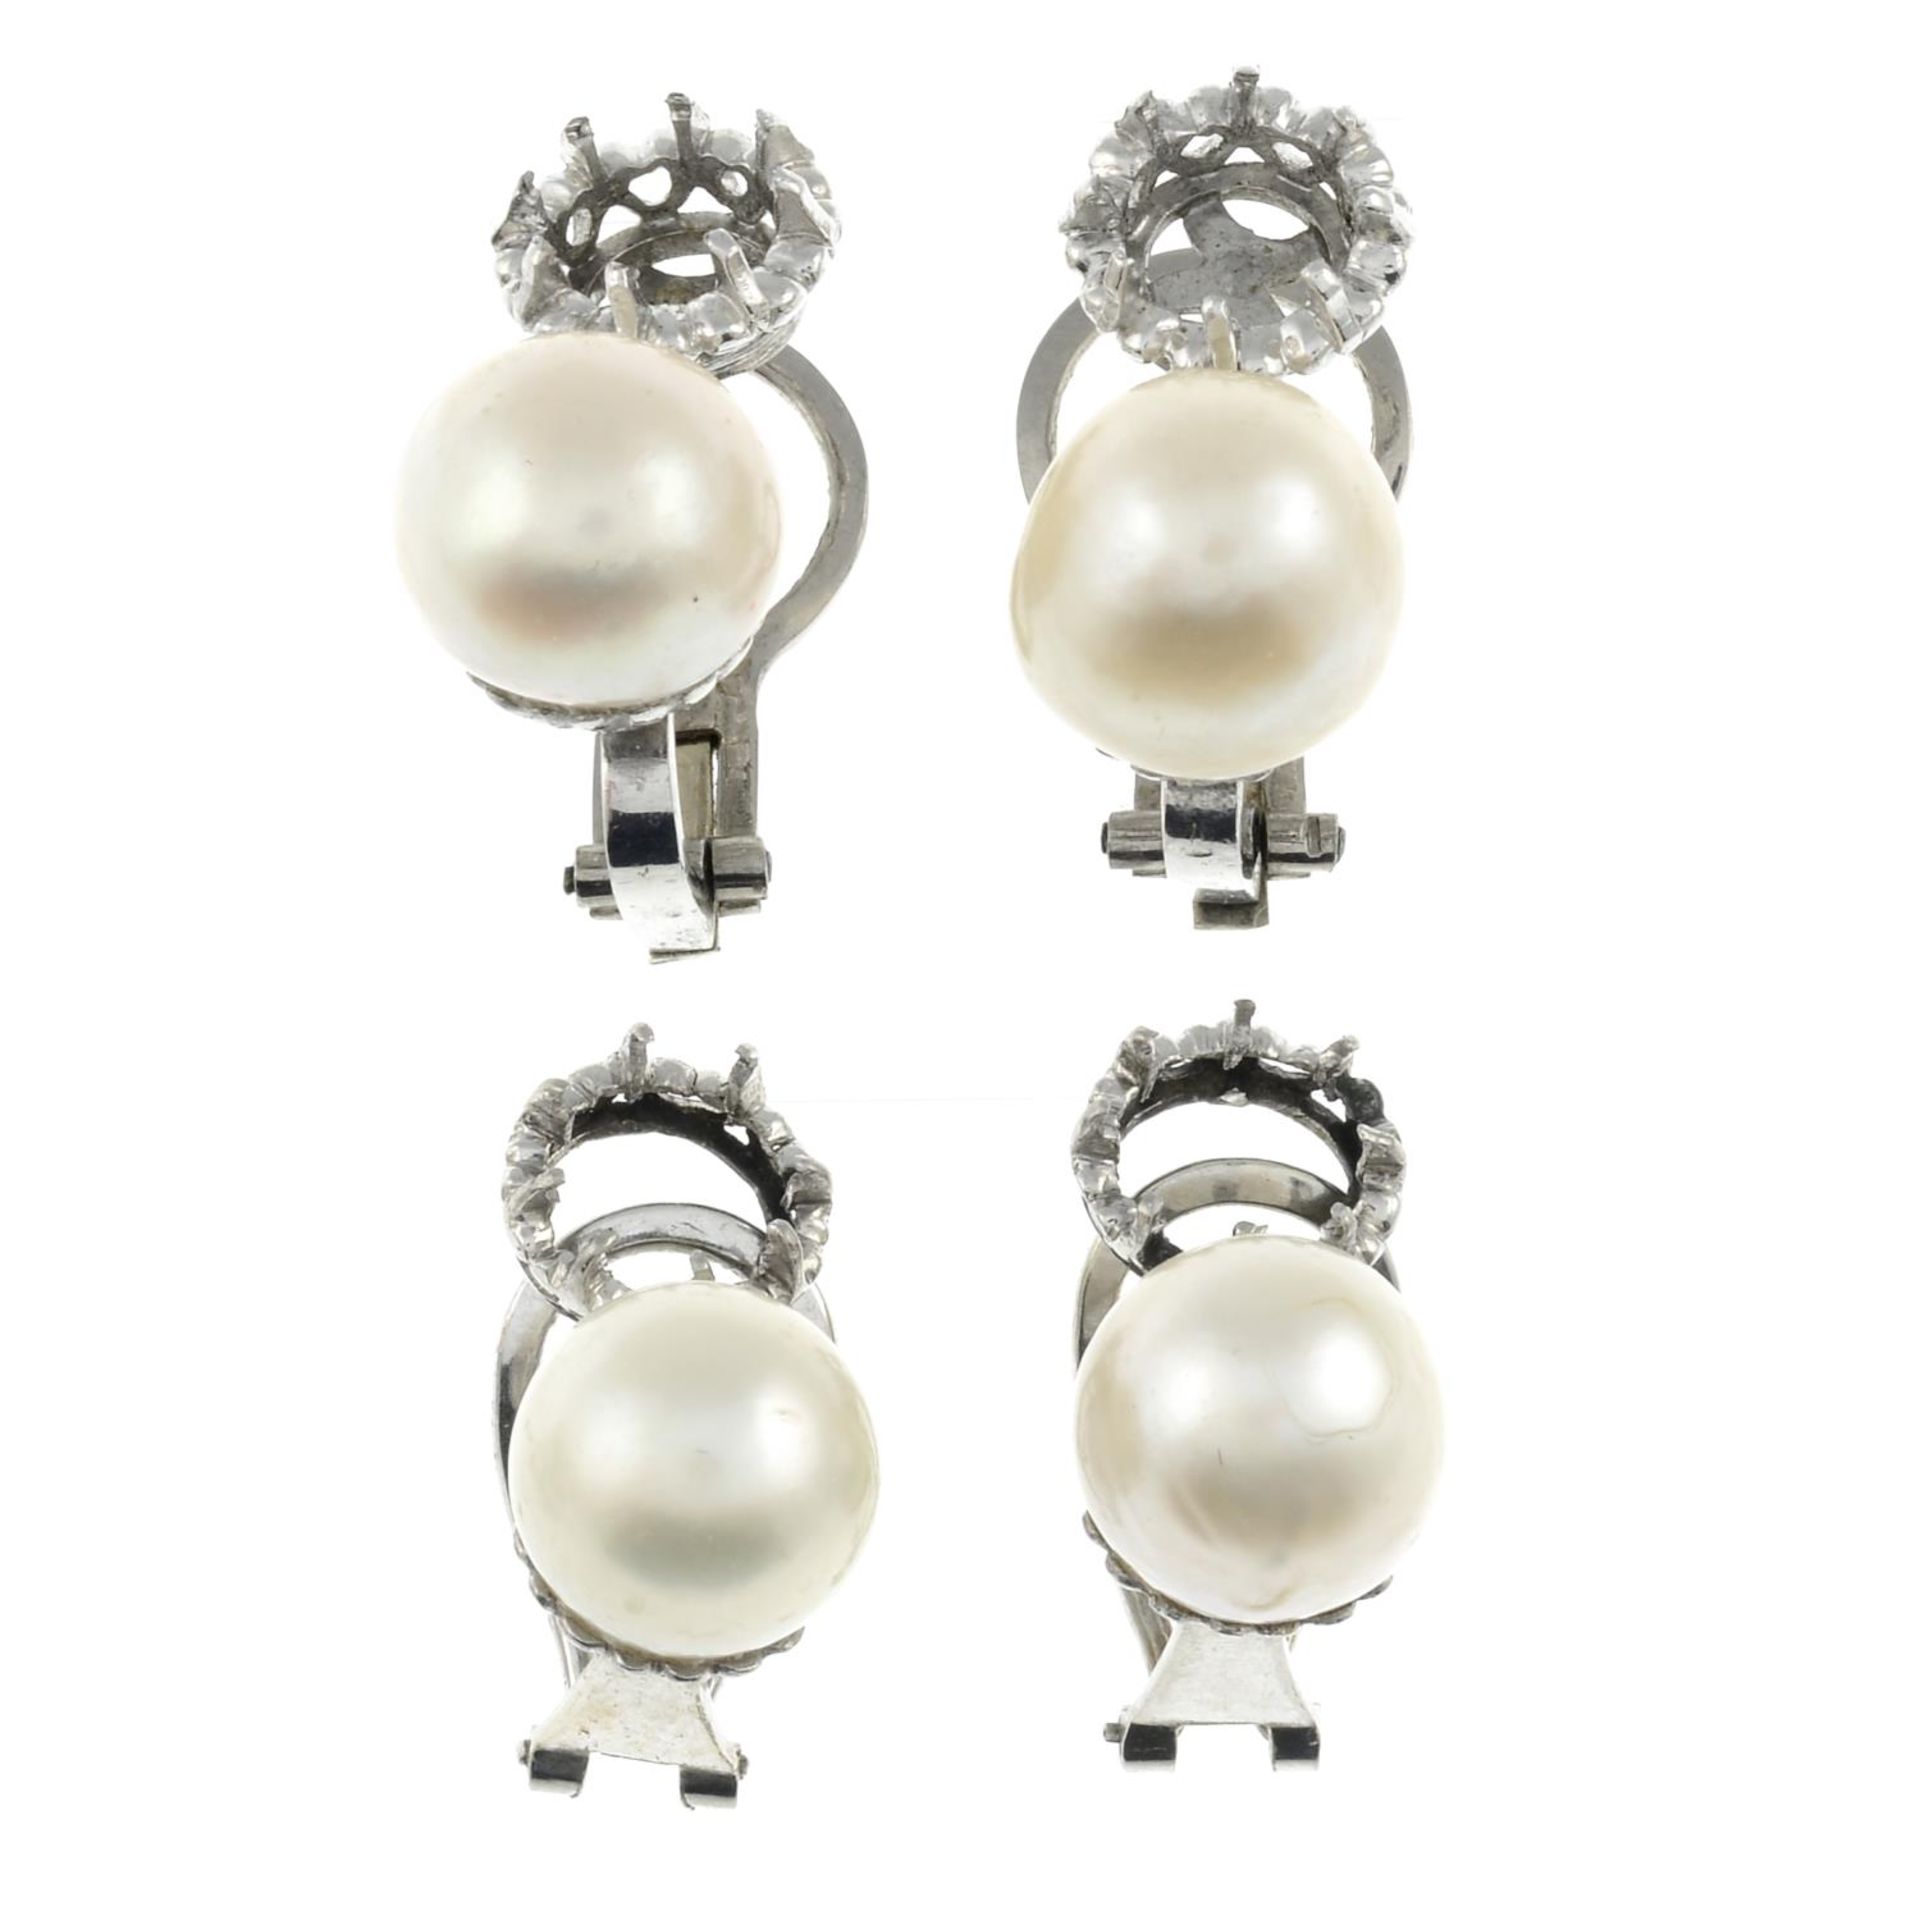 Three pairs of cultured , split and mabe pearl earring mounts.One pair stamped 750.